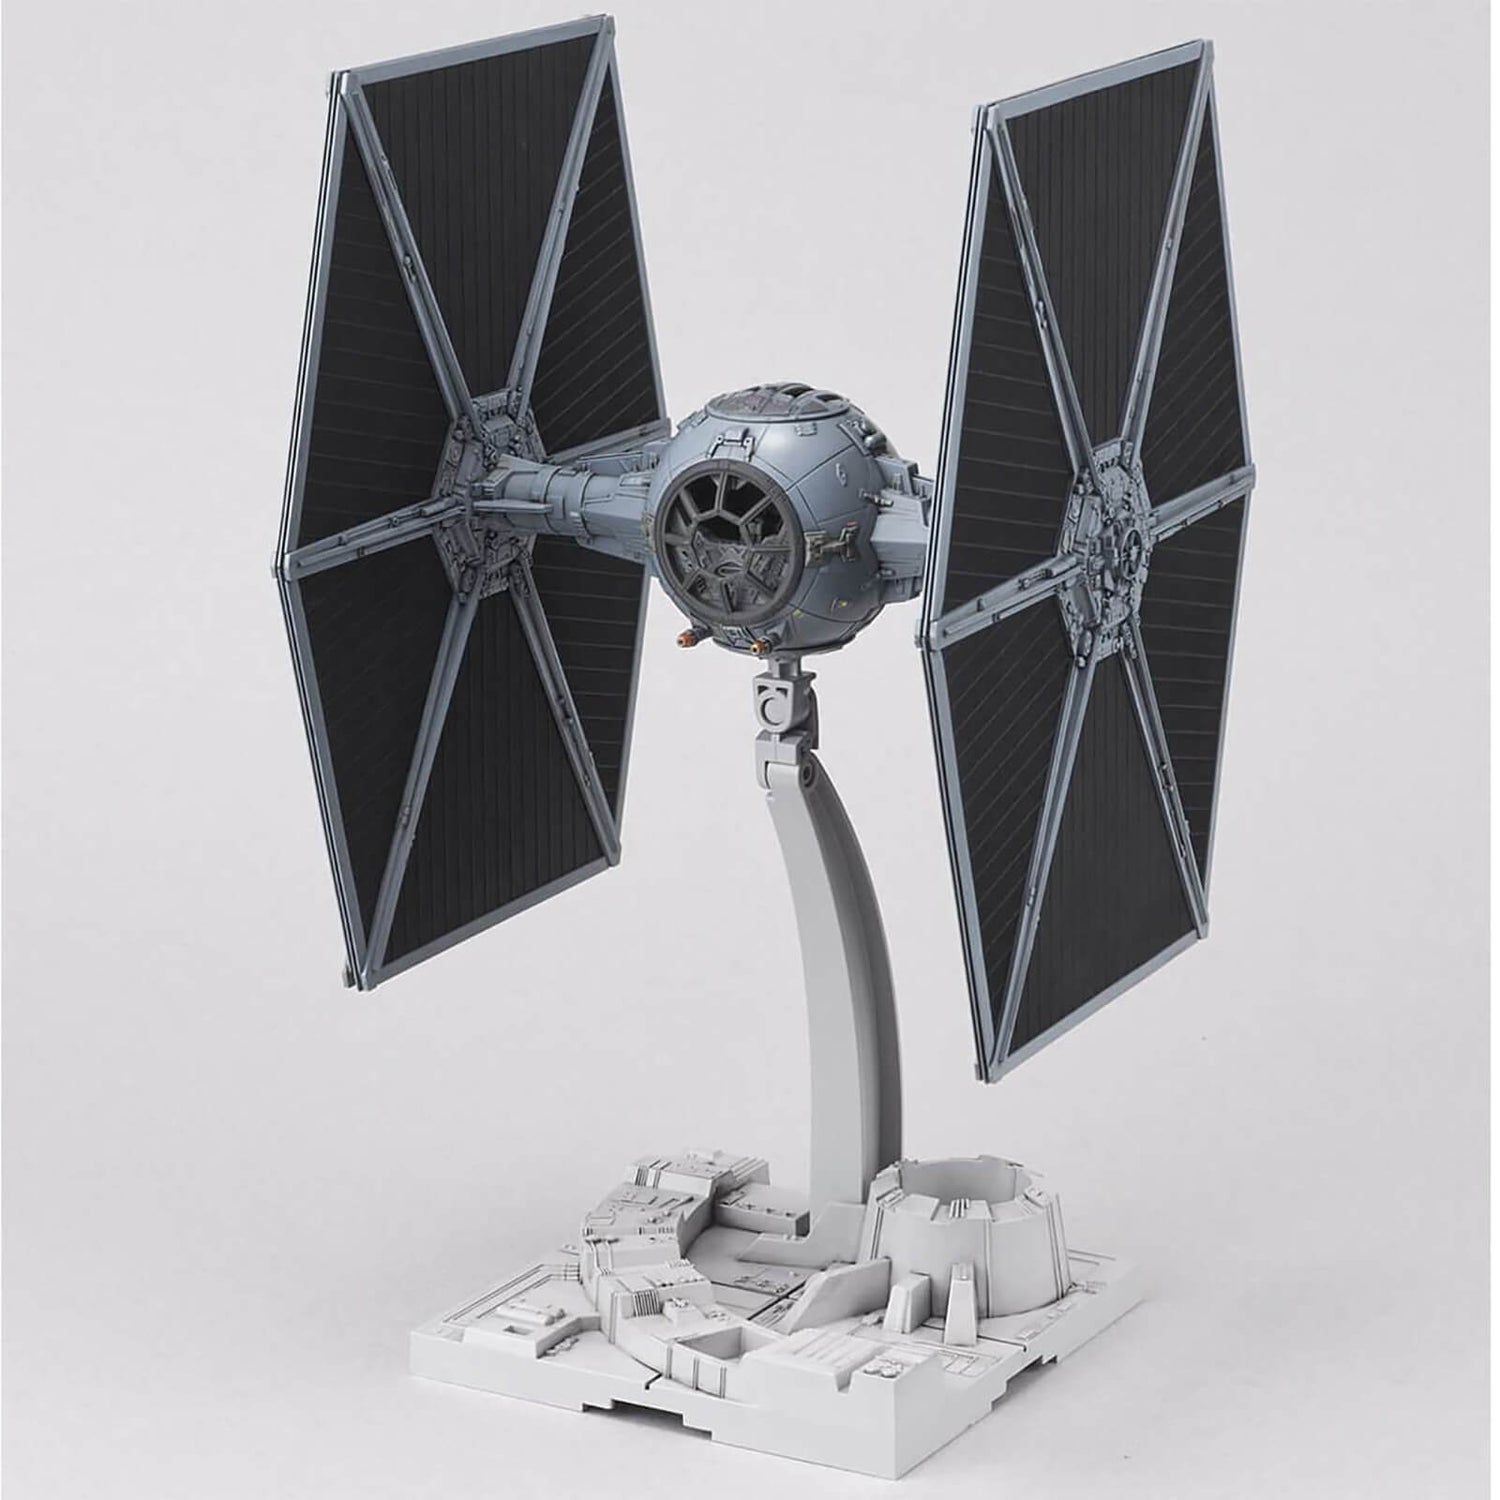 Revell Star Wars Tie Fighter Plastic Buildable Model 1:72 Scale